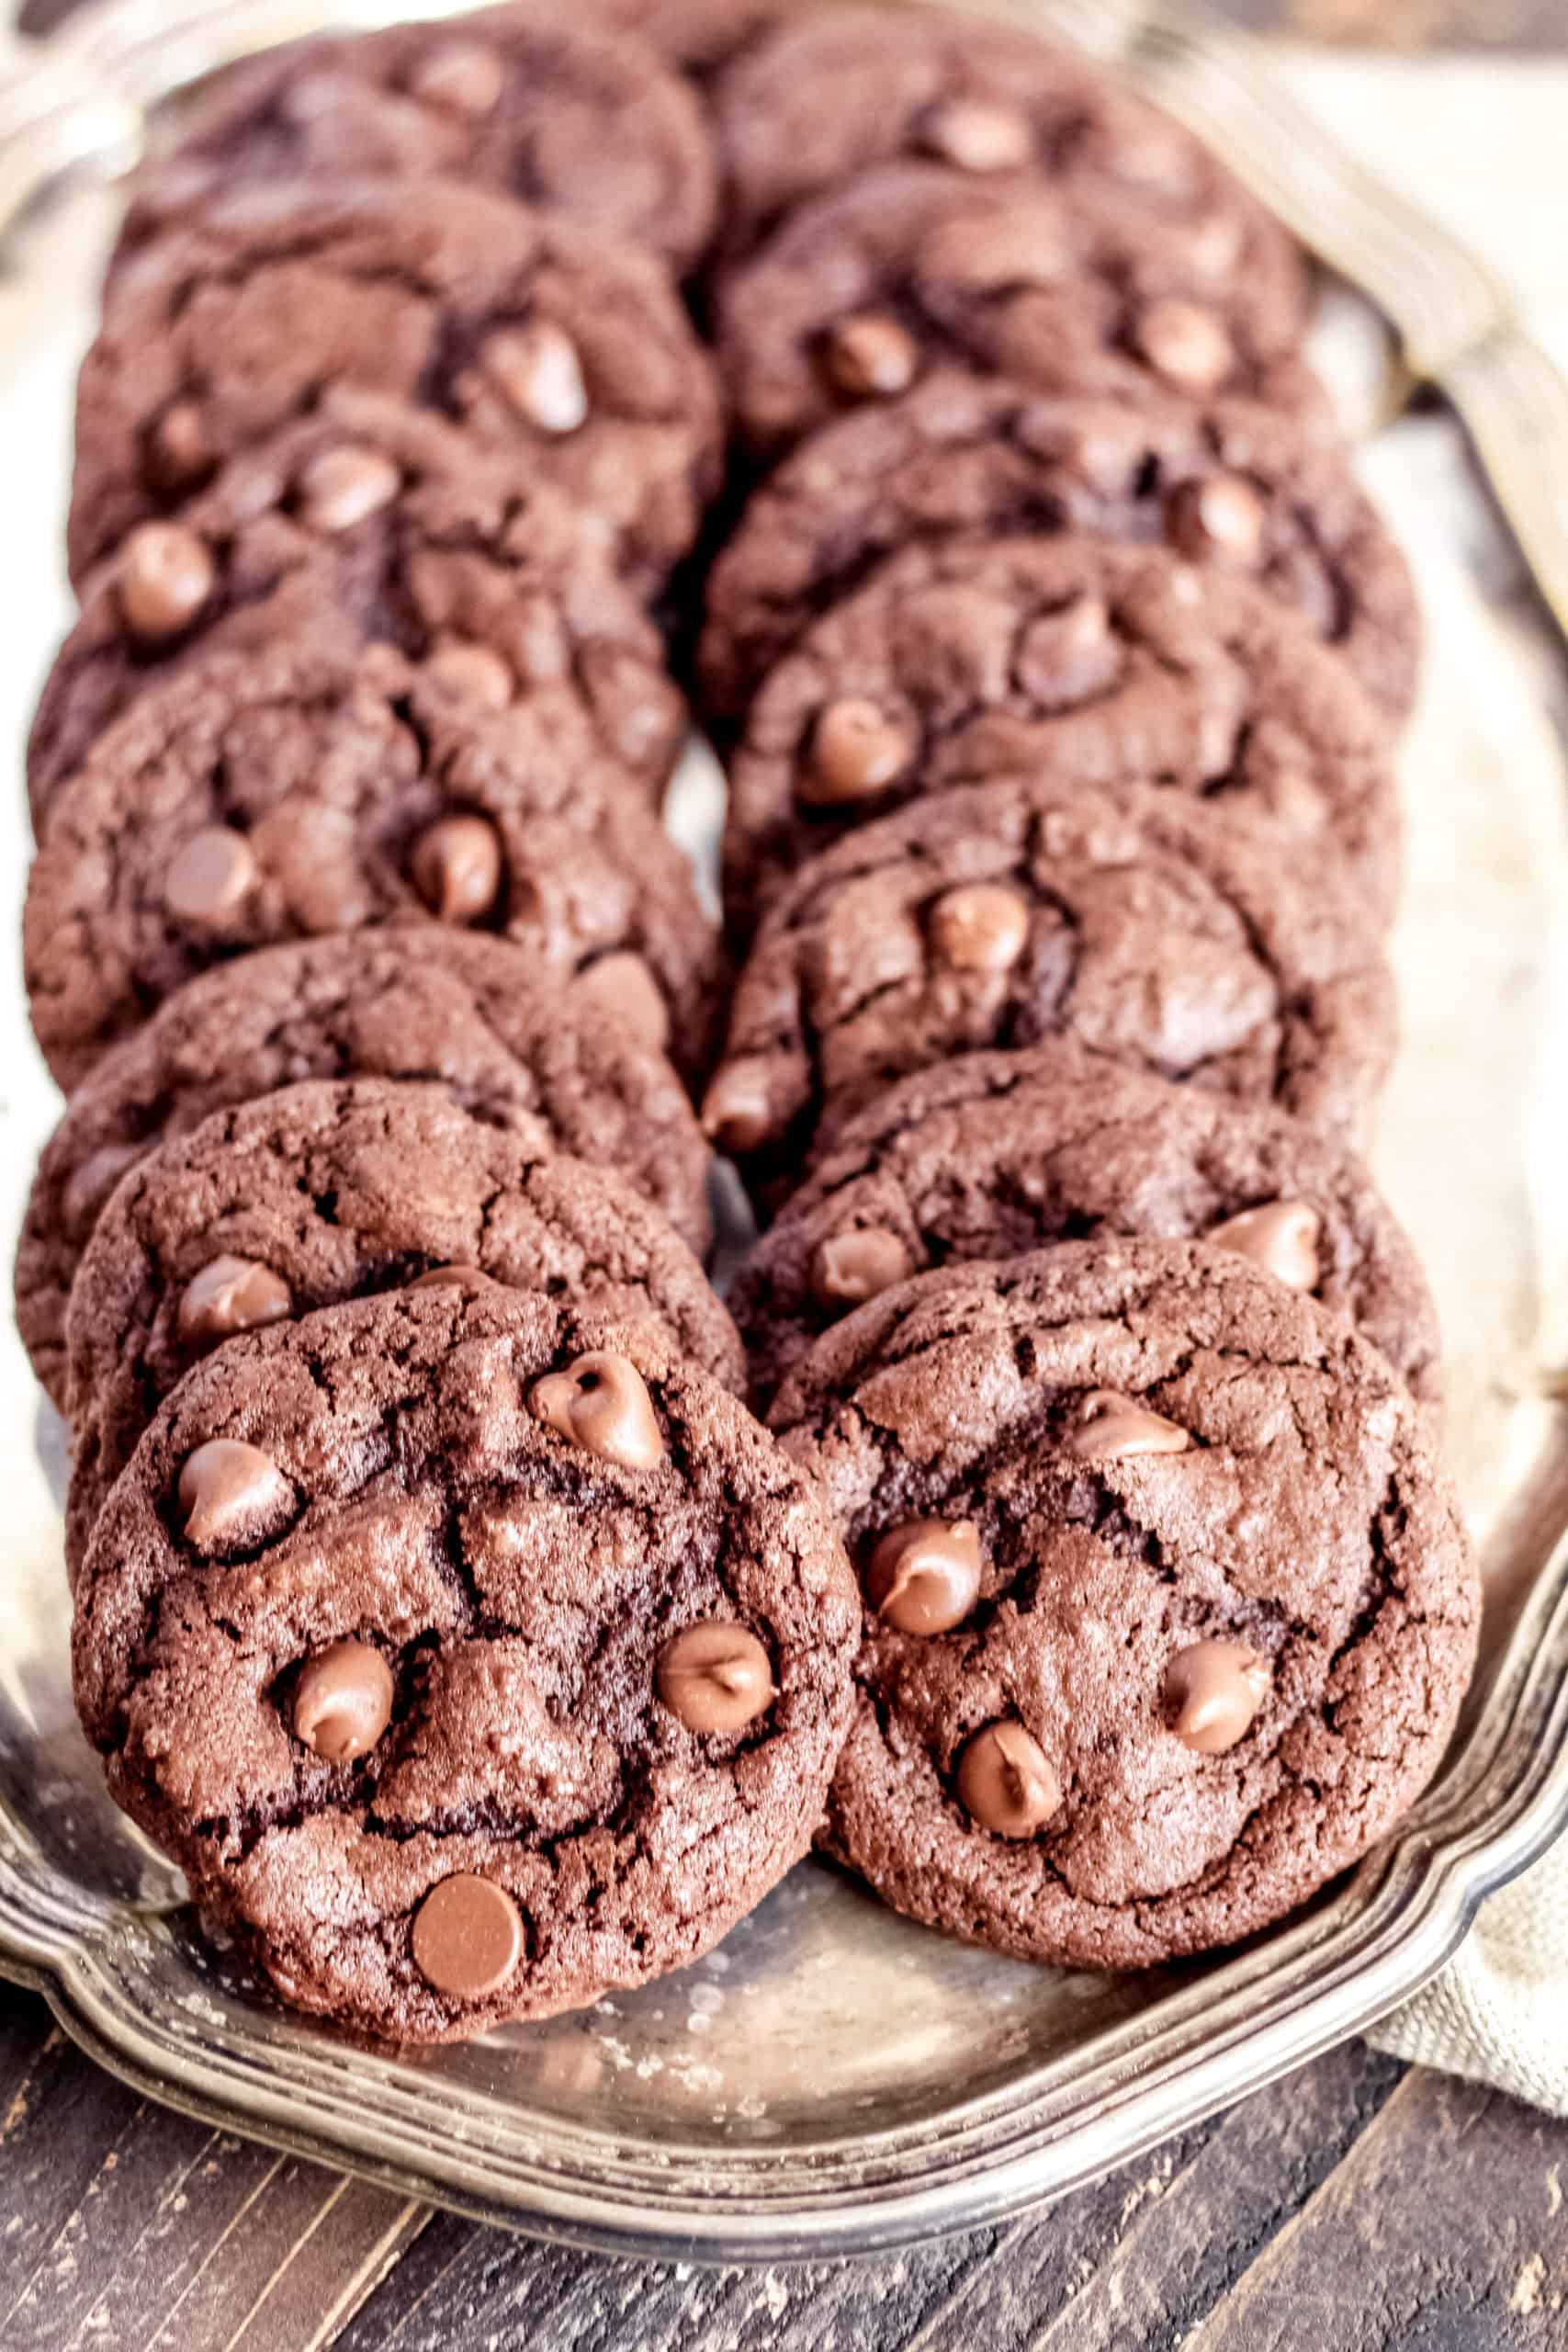 A close up of chocolate cookies